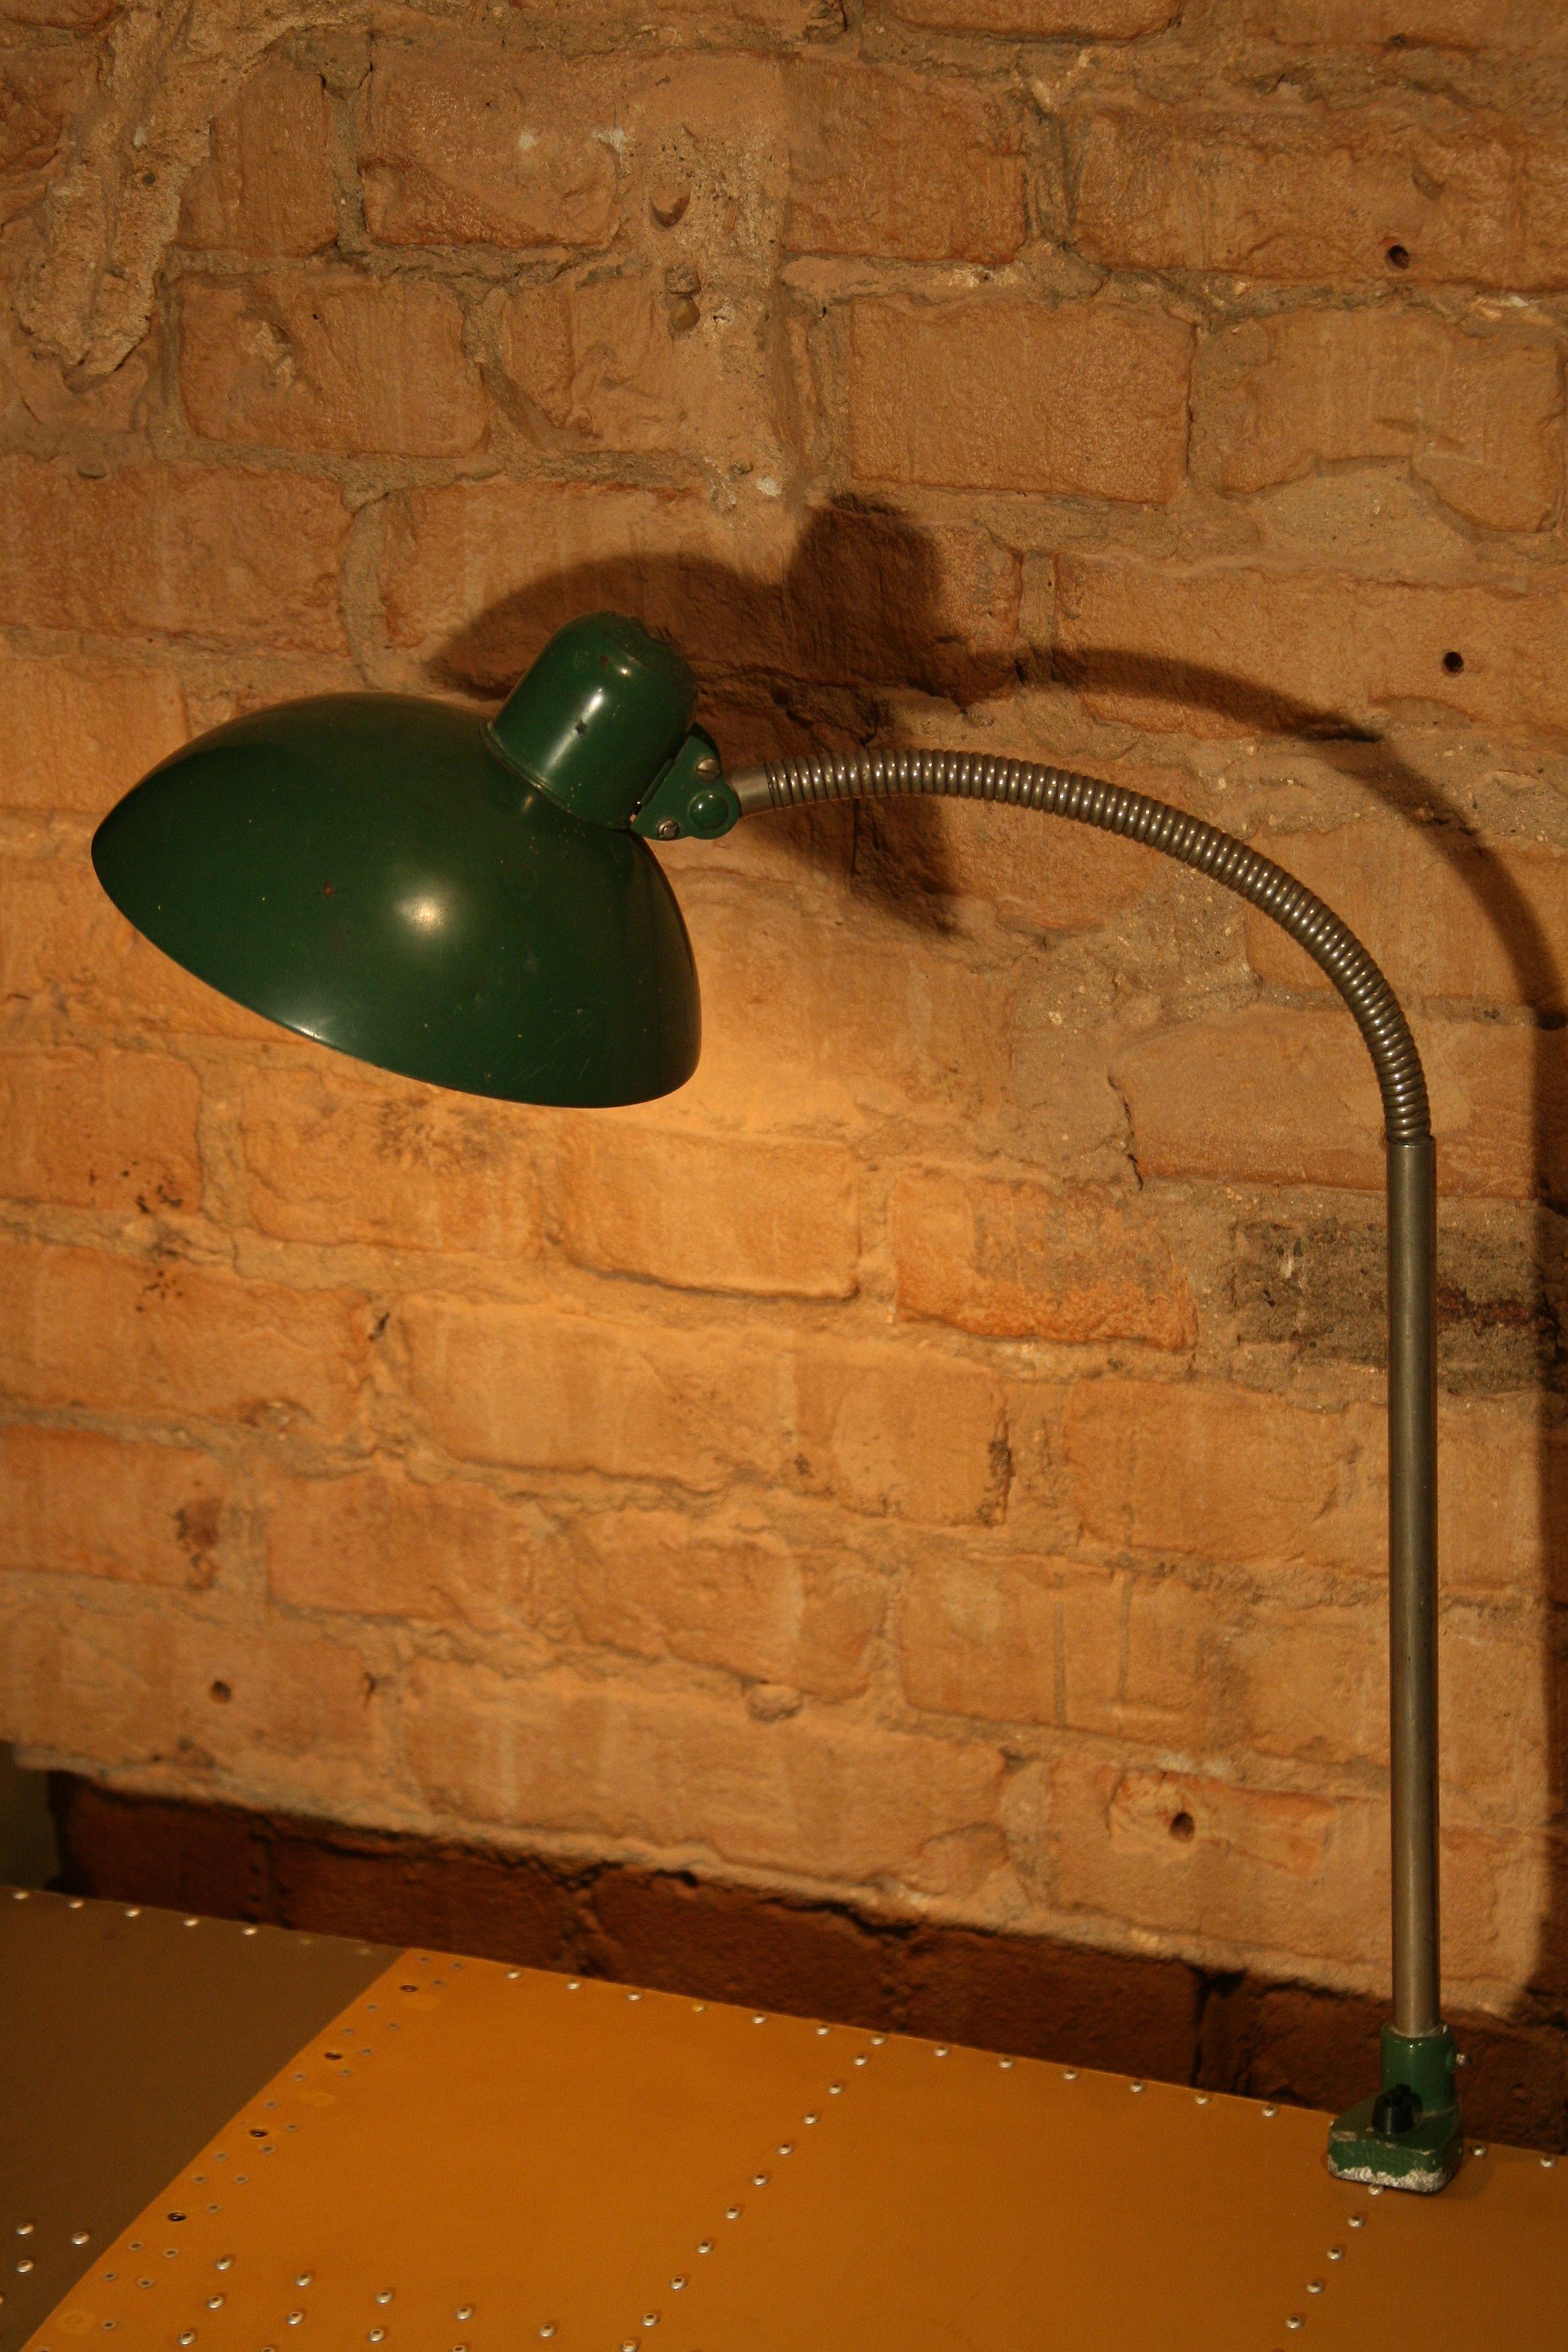 The original Kaiser lamp type 8740 was designed in 1933 by Bauhaus master Christian Della. It is a classic example of industrial design from the 1930s.
The offered lamp is a rare version in the original green finish.
Producer: Gebruder Kaiser &